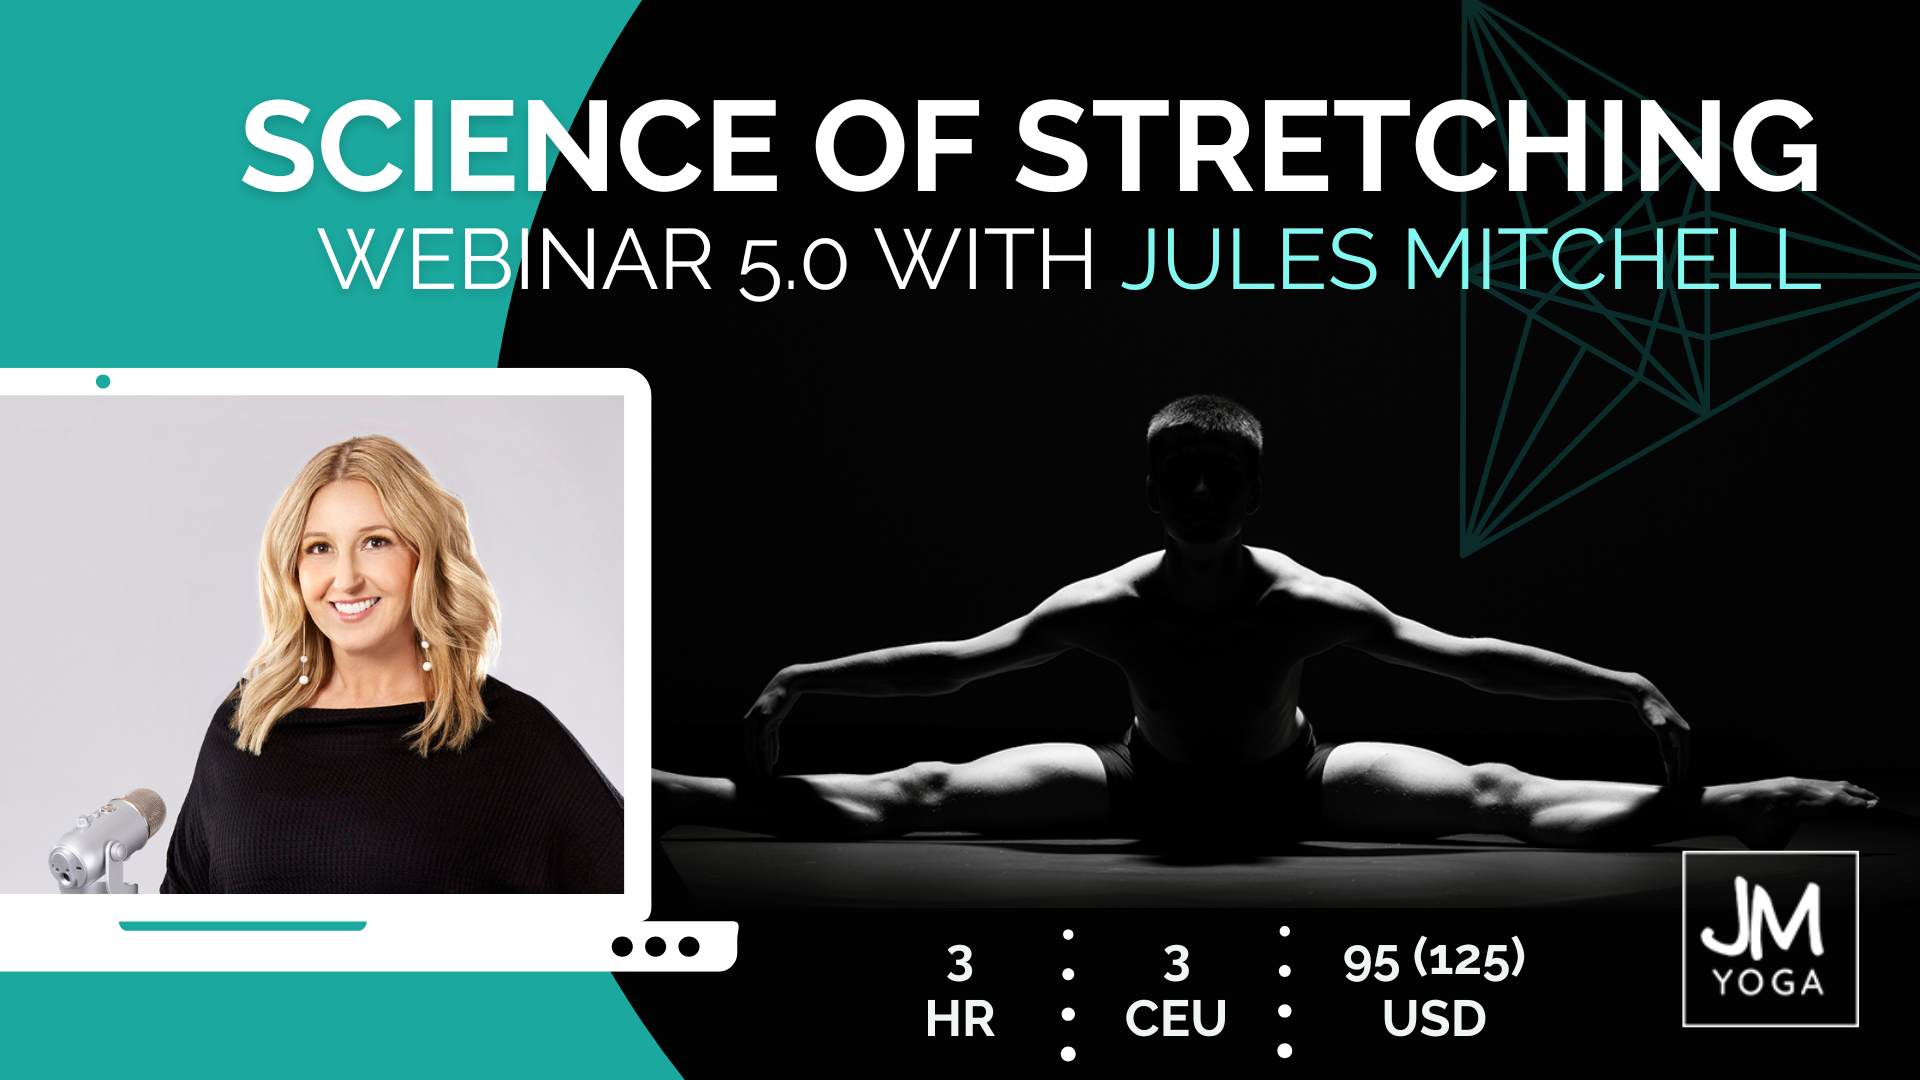 Jules Mitchell shares decades of stretching research with yoga teachers.